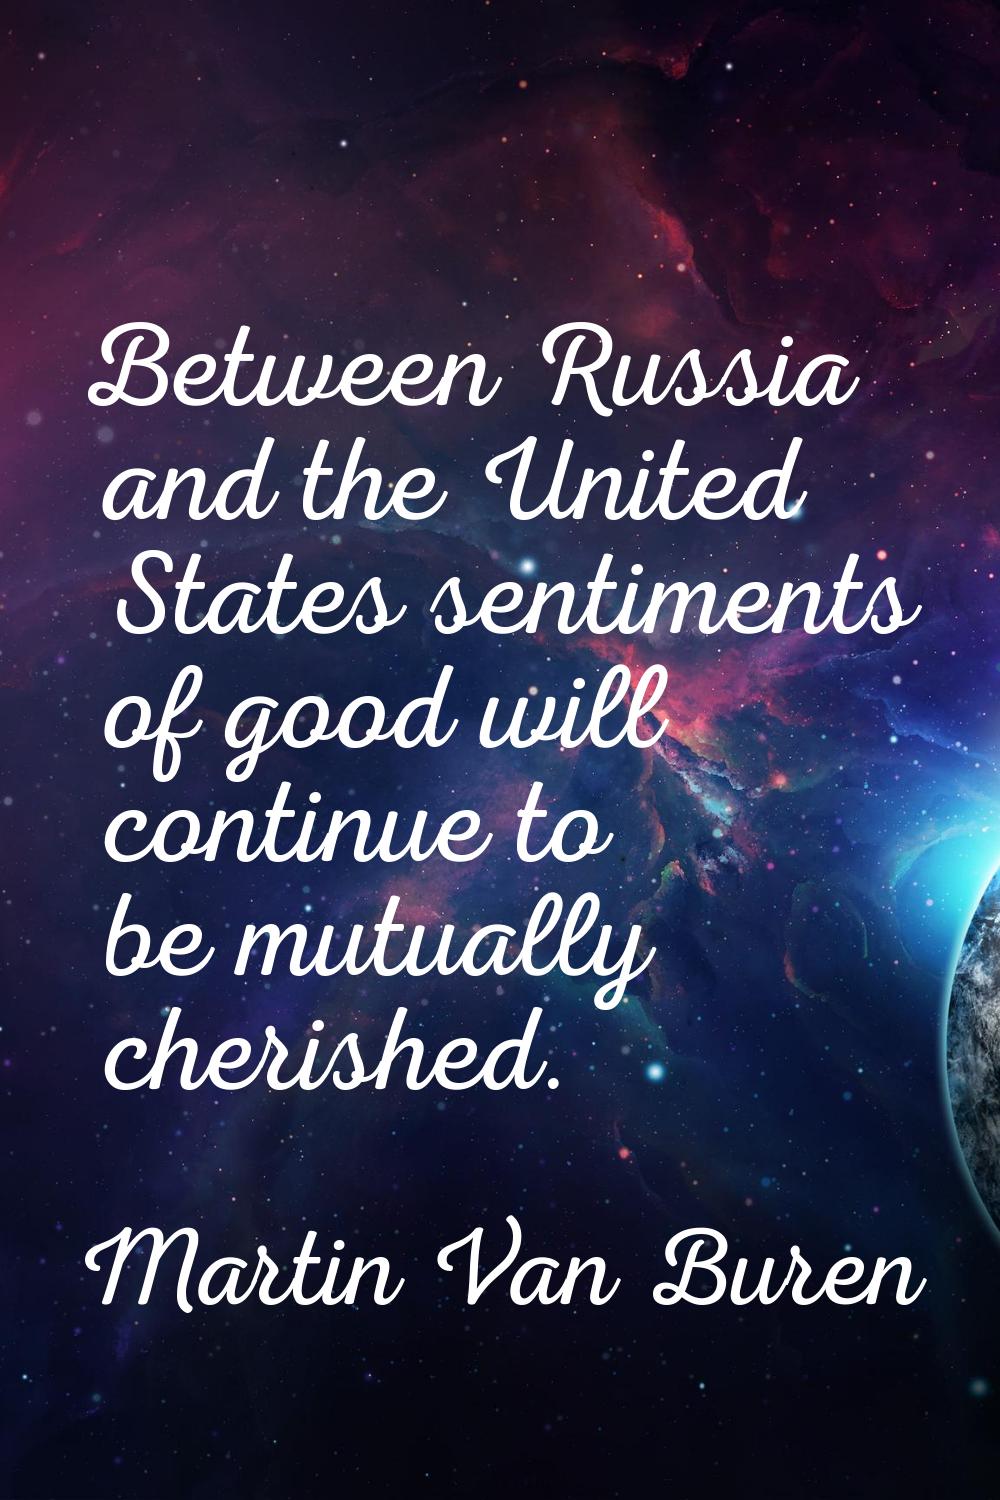 Between Russia and the United States sentiments of good will continue to be mutually cherished.